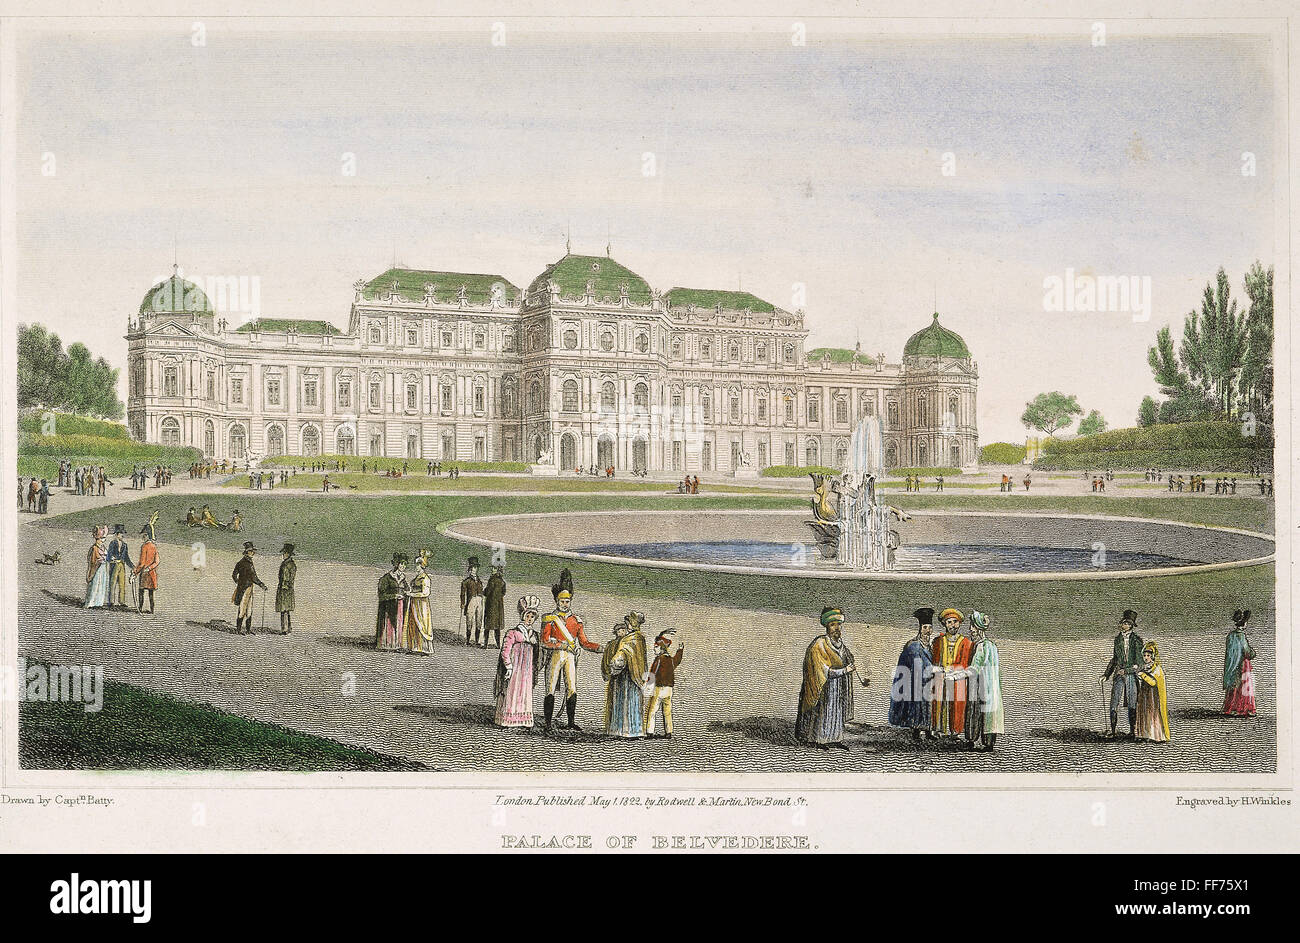 VIENNA: BELVEDERE, 1822. /nThe Palace of Belvedere in Vienna, Austria. Line engraving, 1822, after a drawing by Robert Batty. Stock Photo